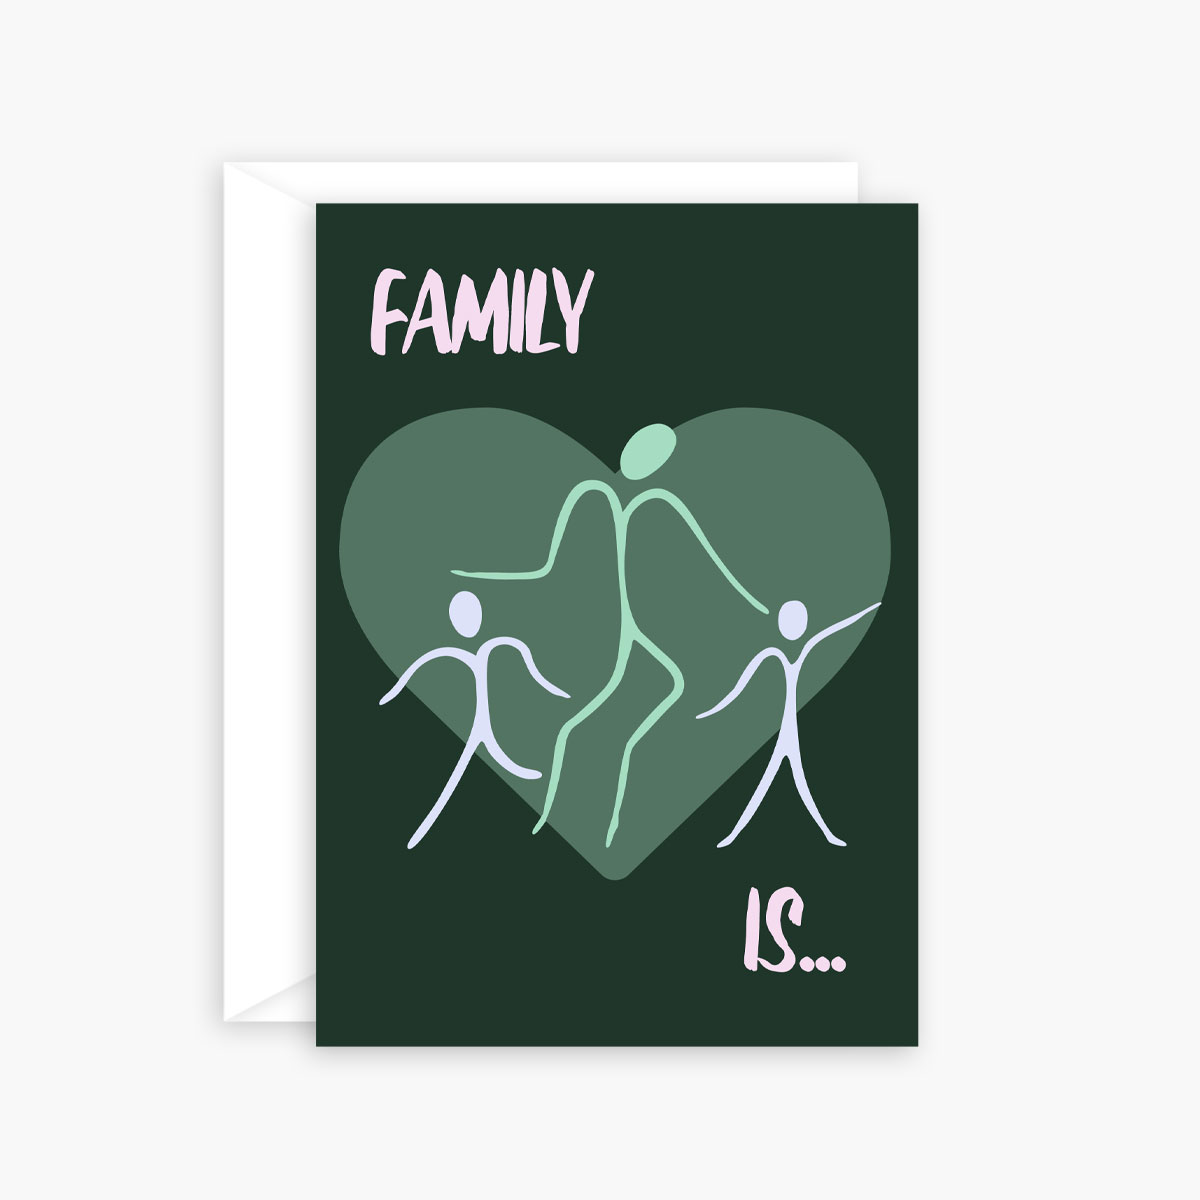 Family is… time well spent – greeting card